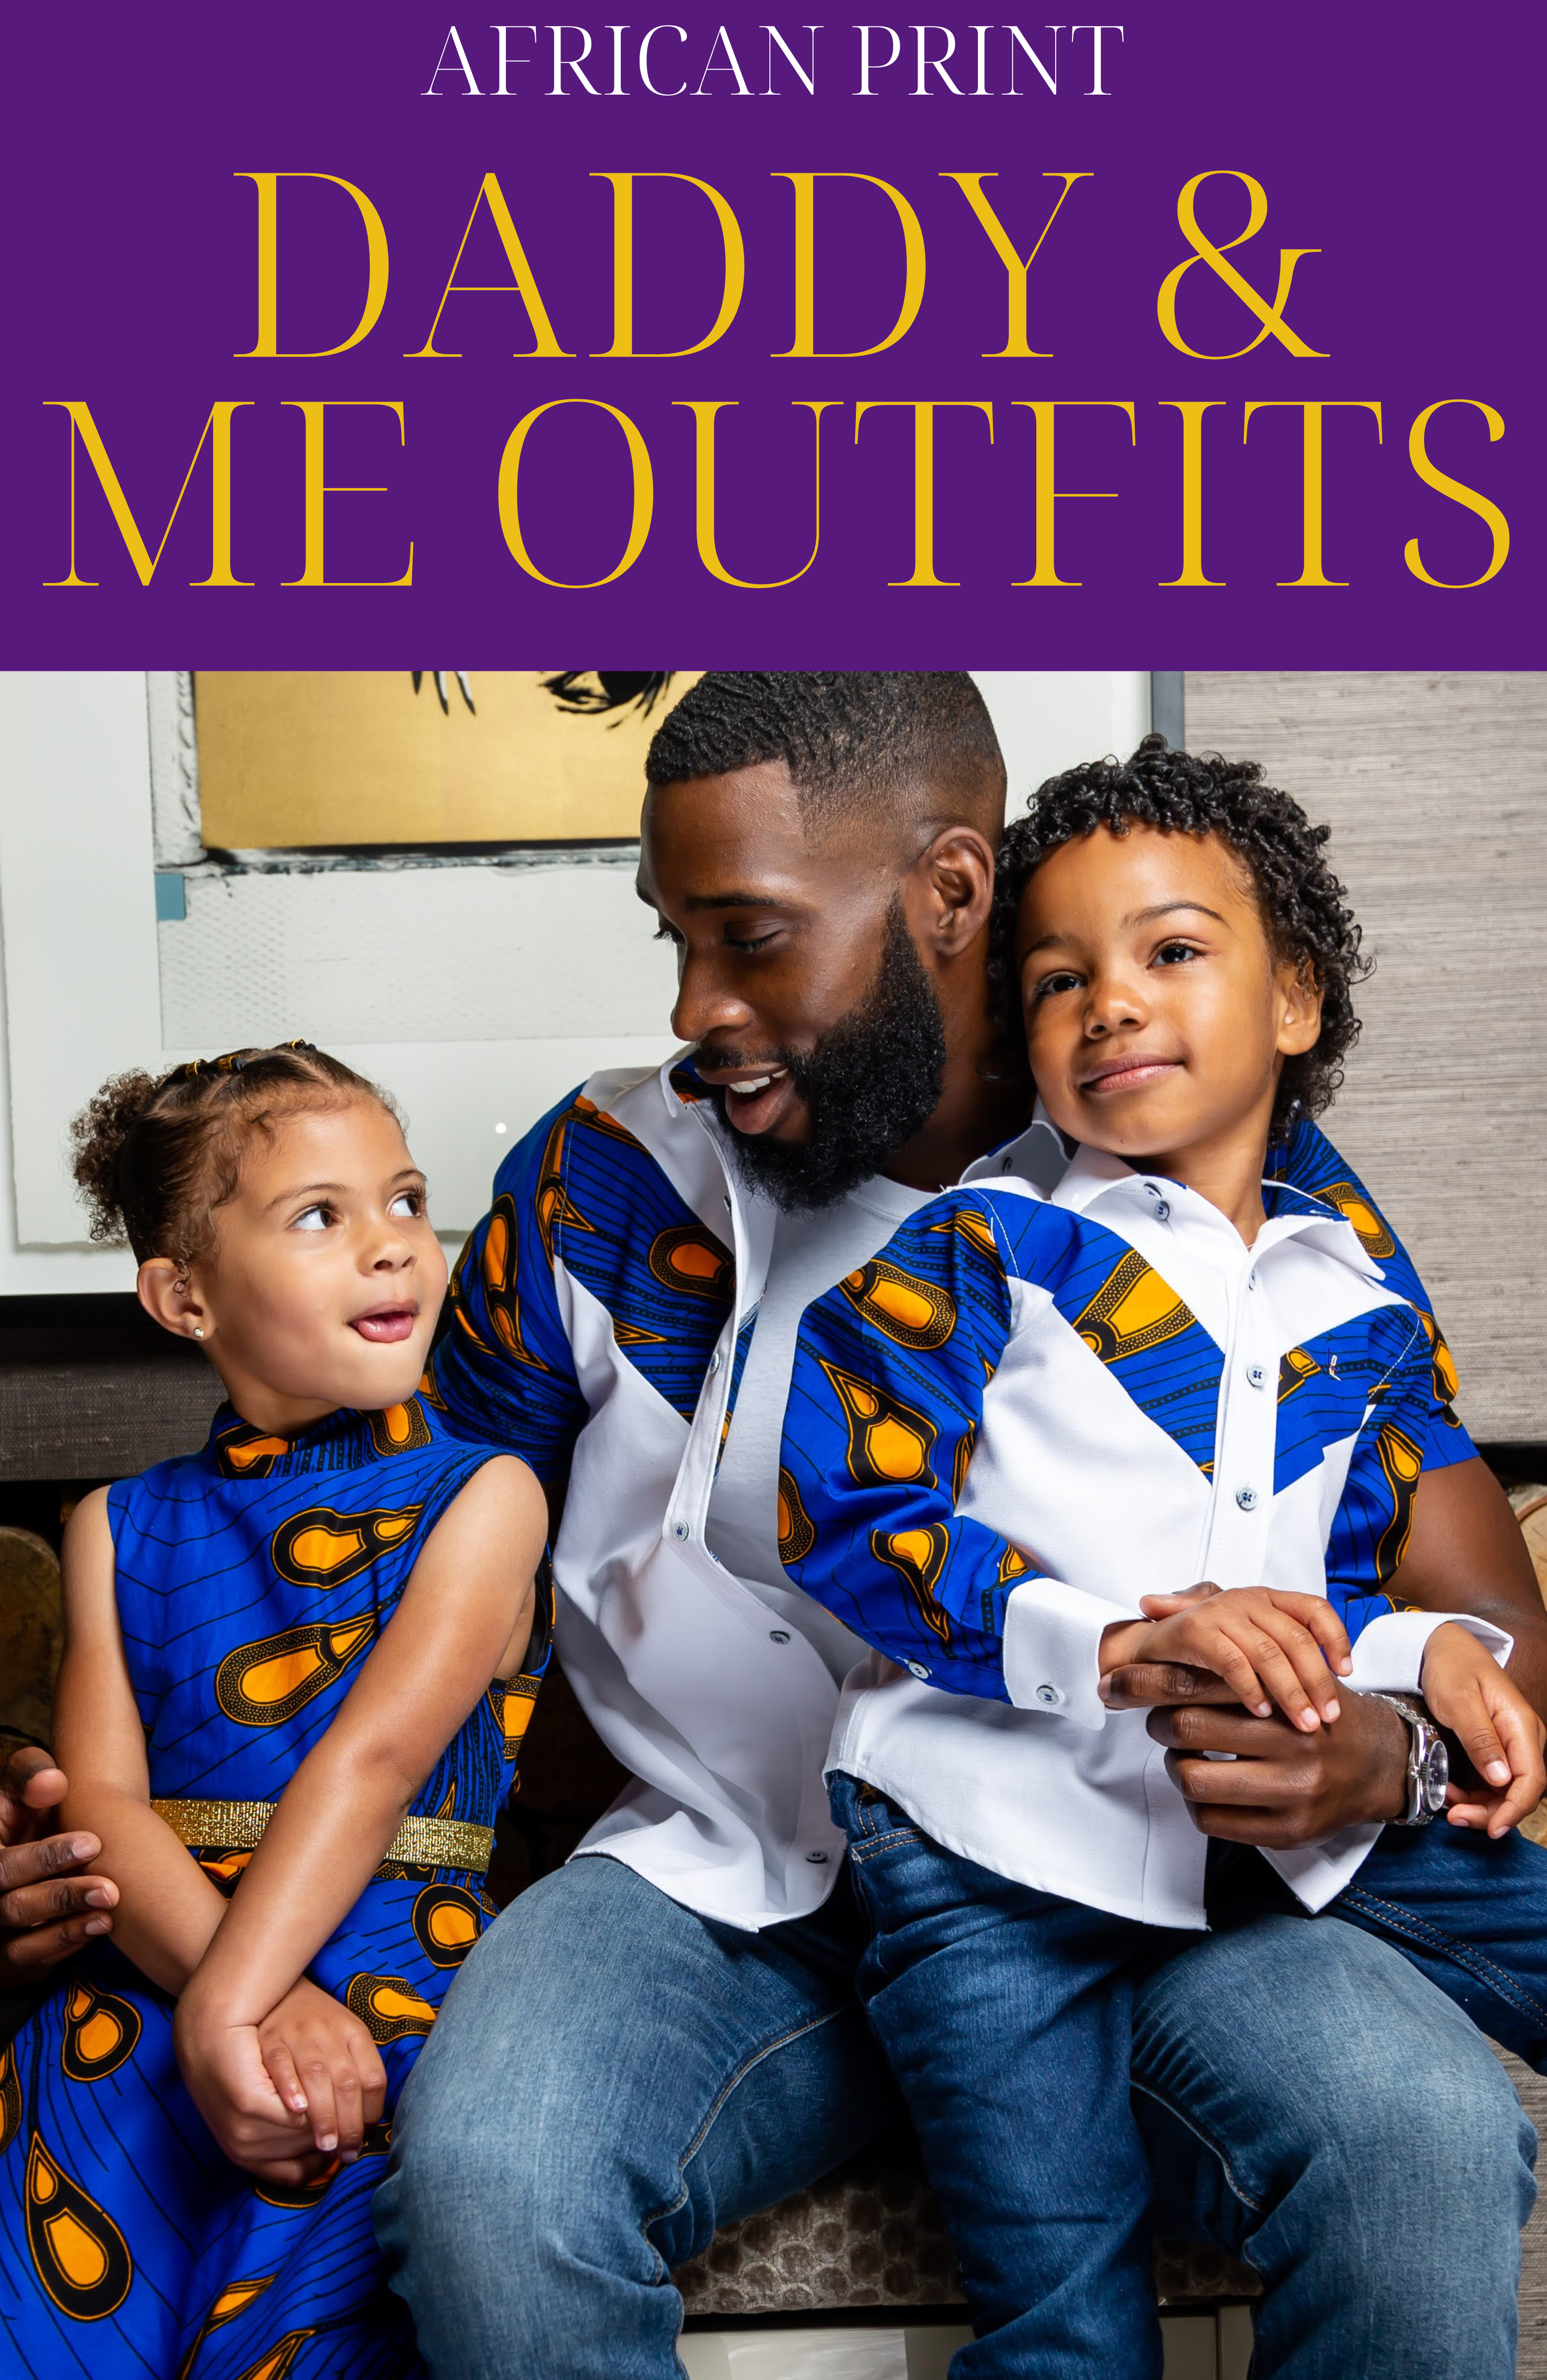 Father Son Matching African Outfits, African Print Daddy & Me – LAVIYE